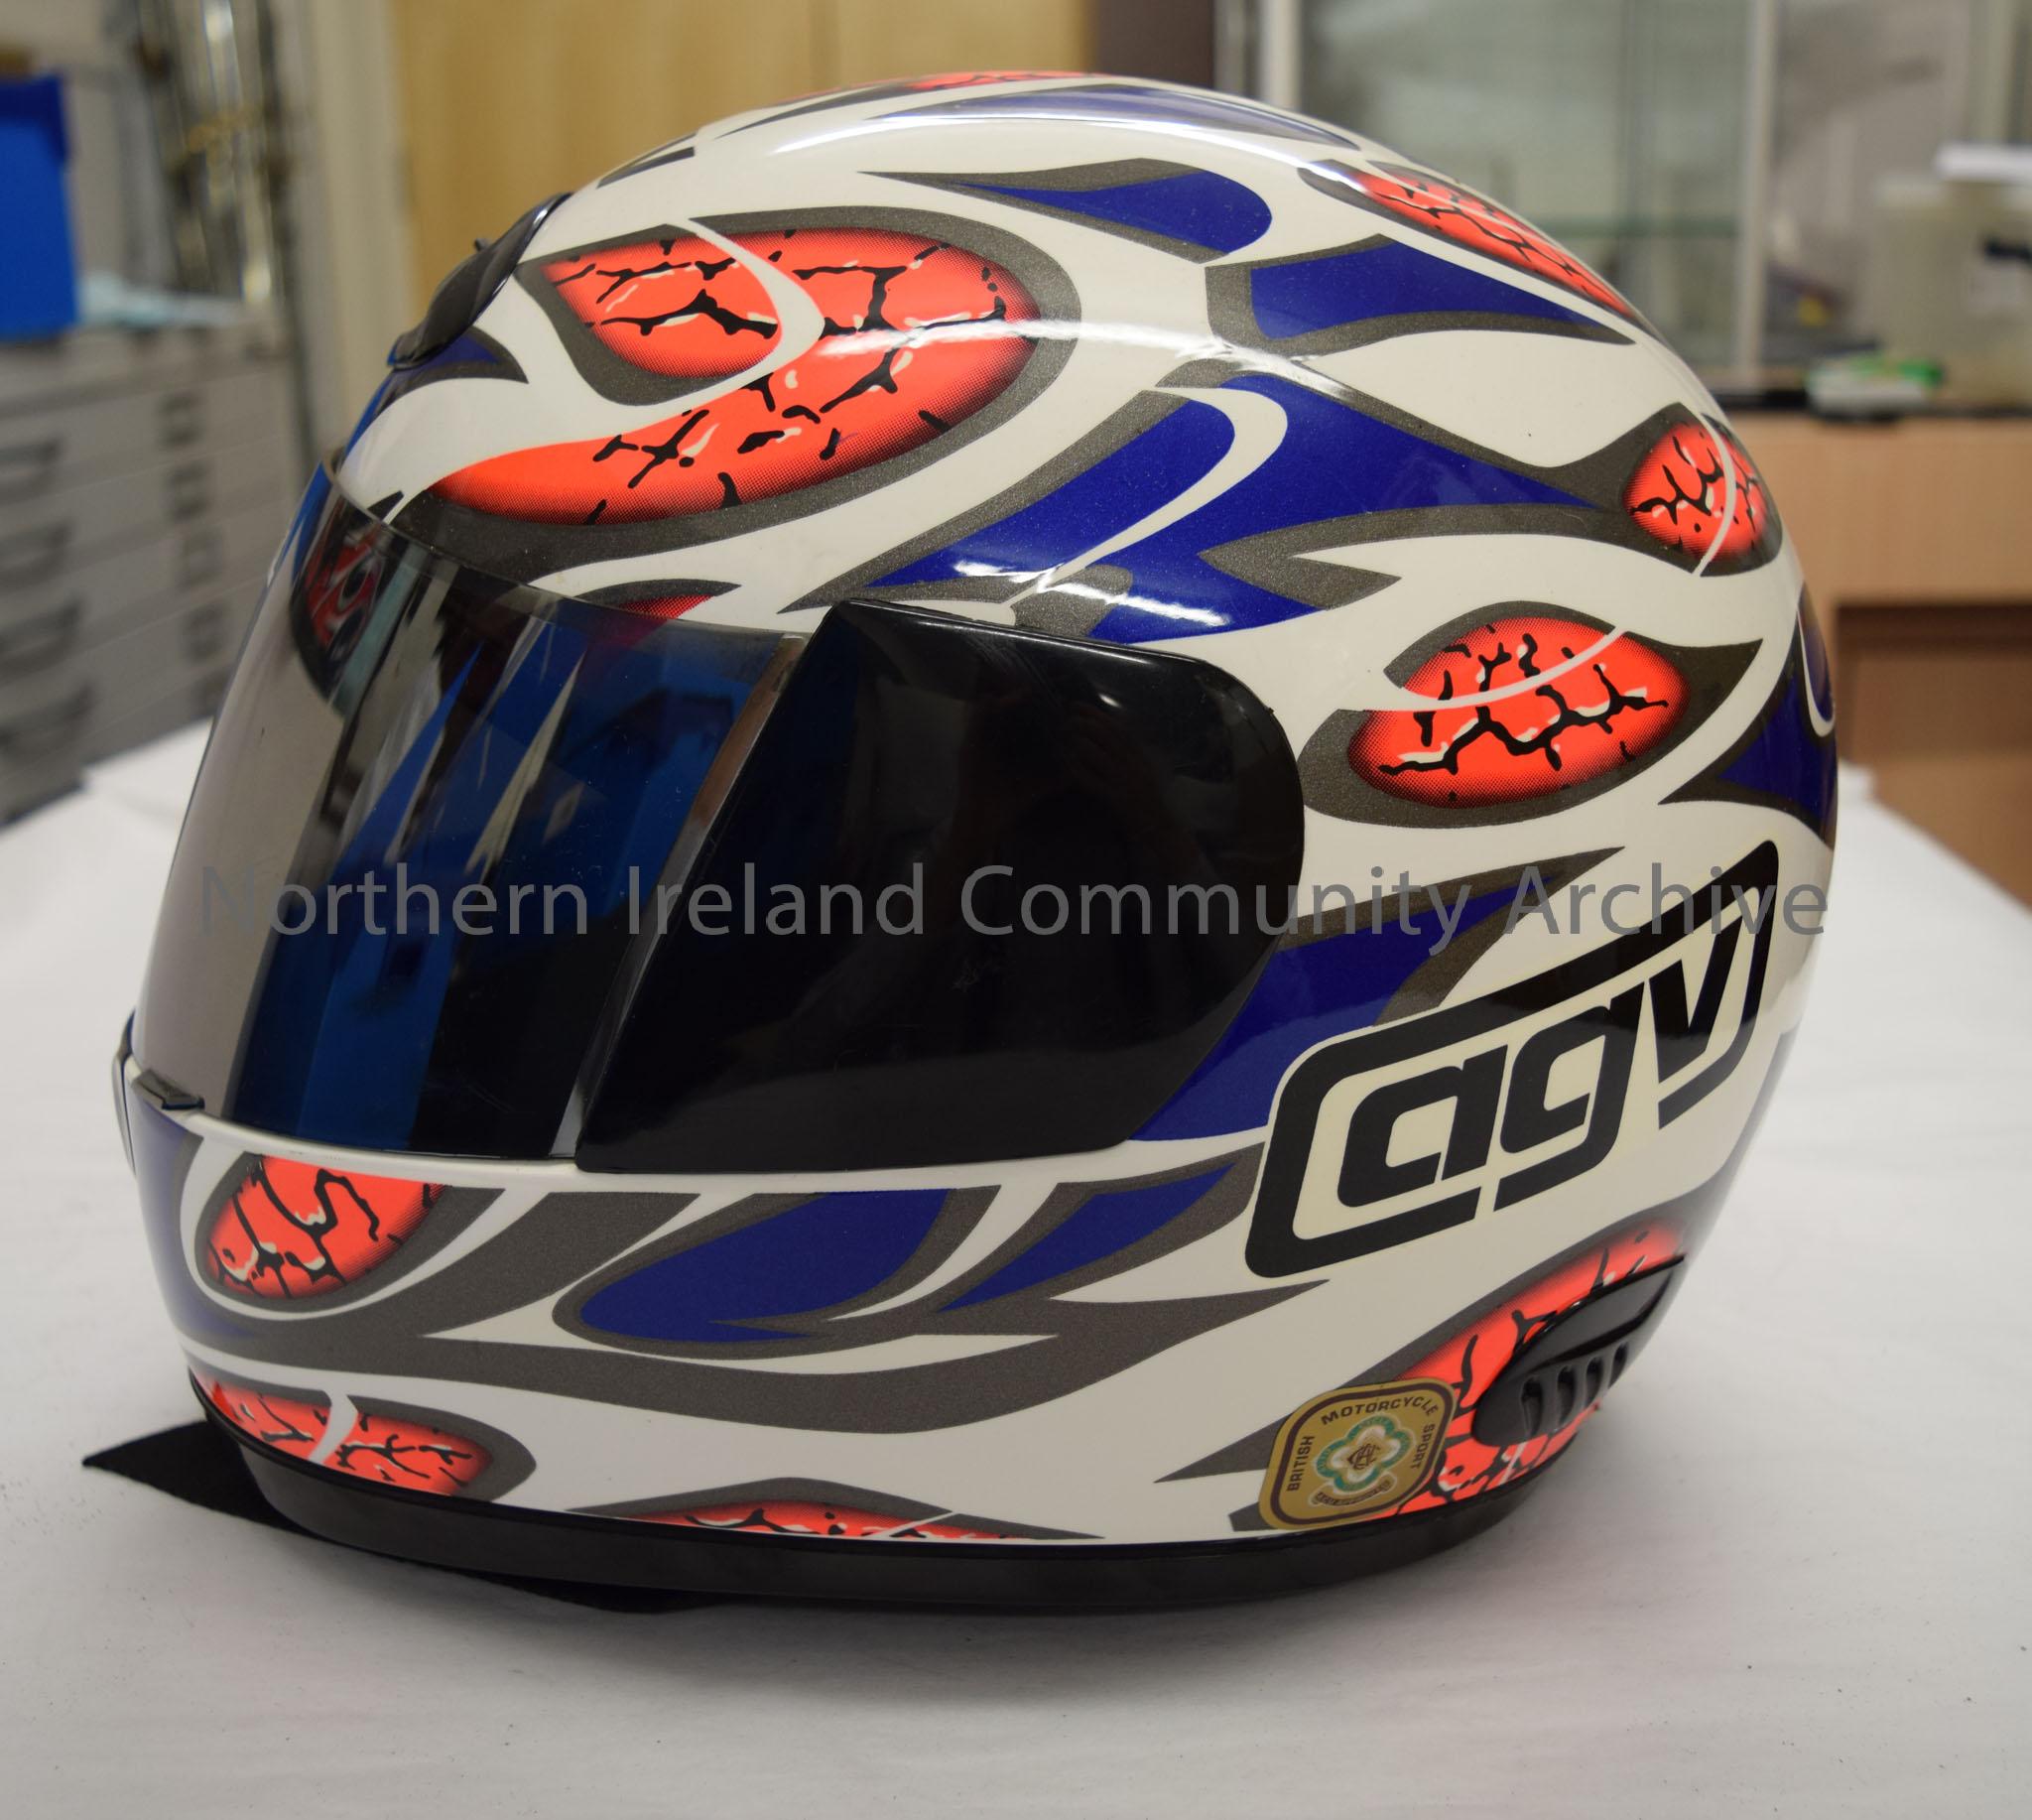 AGV motorcycle helmet belonging to Steve Ball. White helmet with blue and grey pattern and sections in bright orange designed to look a bit like a bra… – 2016.66 (3)